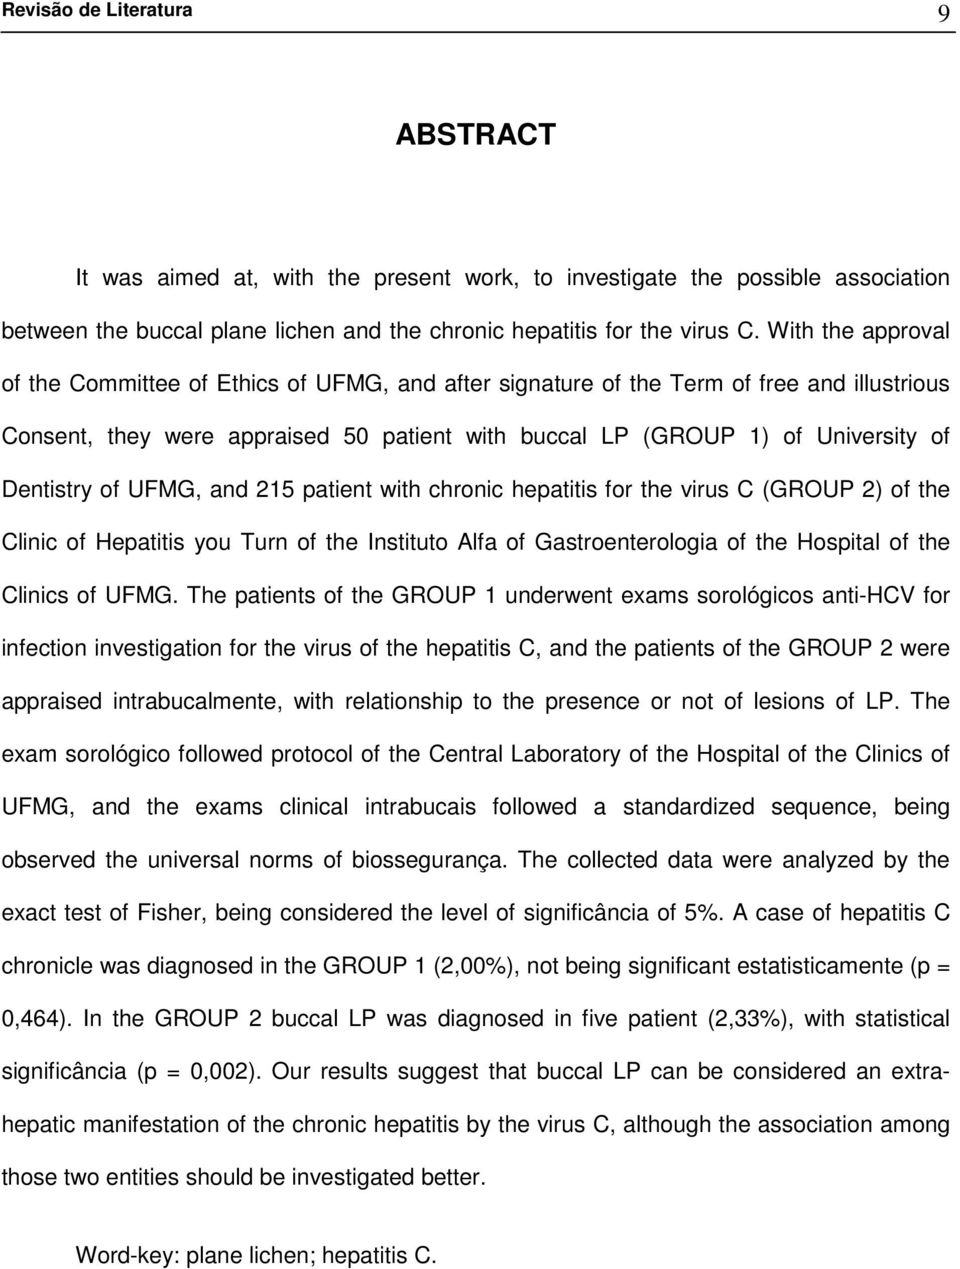 Dentistry of UFMG, and 215 patient with chronic hepatitis for the virus C (GROUP 2) of the Clinic of Hepatitis you Turn of the Instituto Alfa of Gastroenterologia of the Hospital of the Clinics of